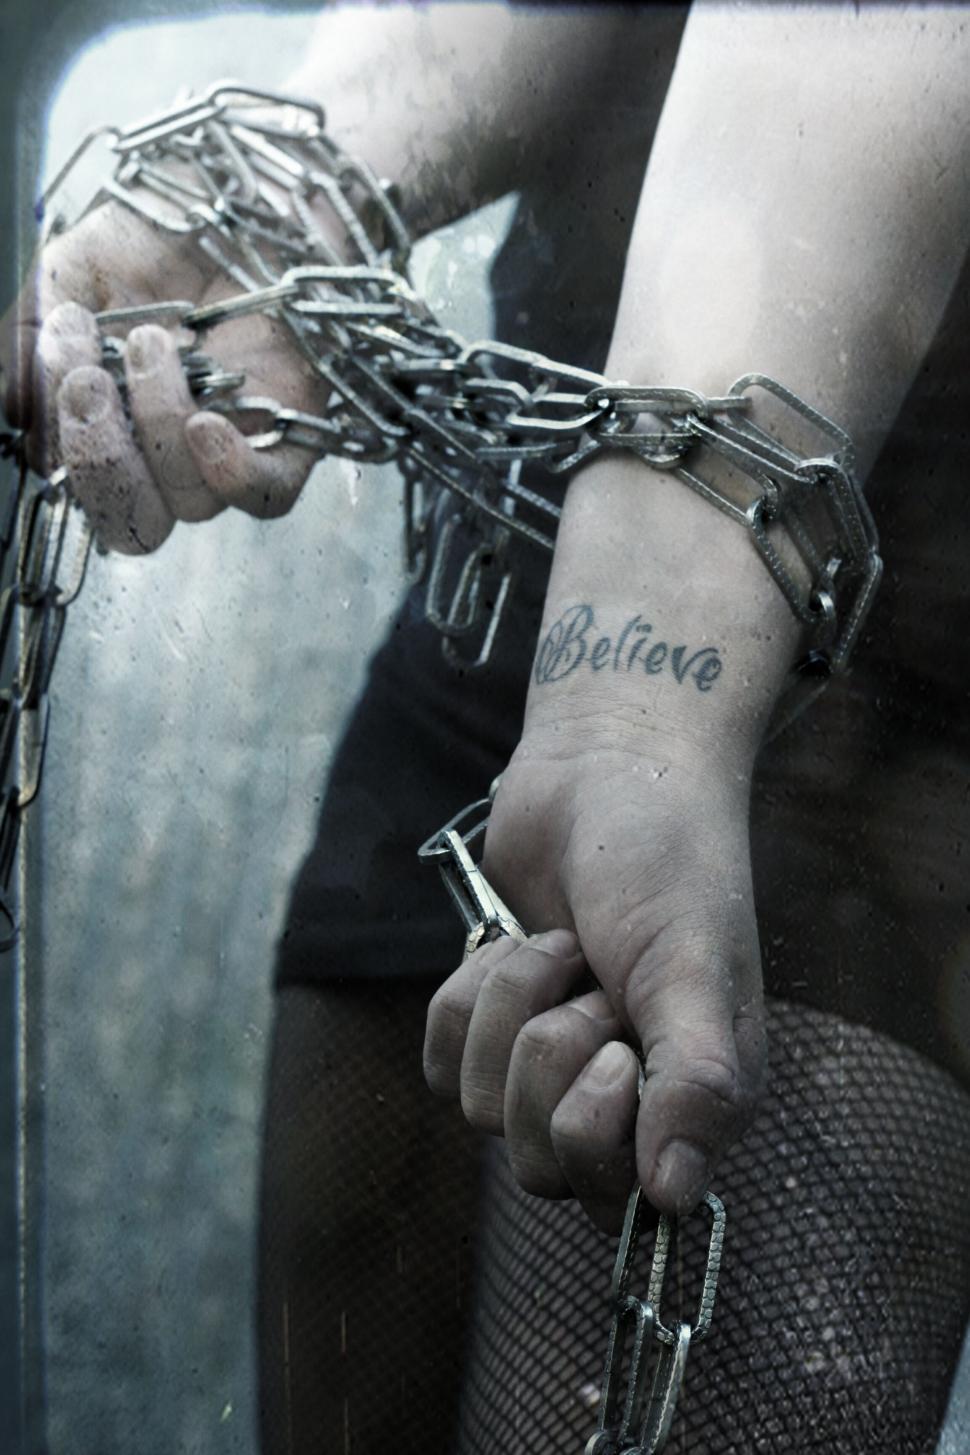 Free Image of Hands chained with tattoo saying Believe 